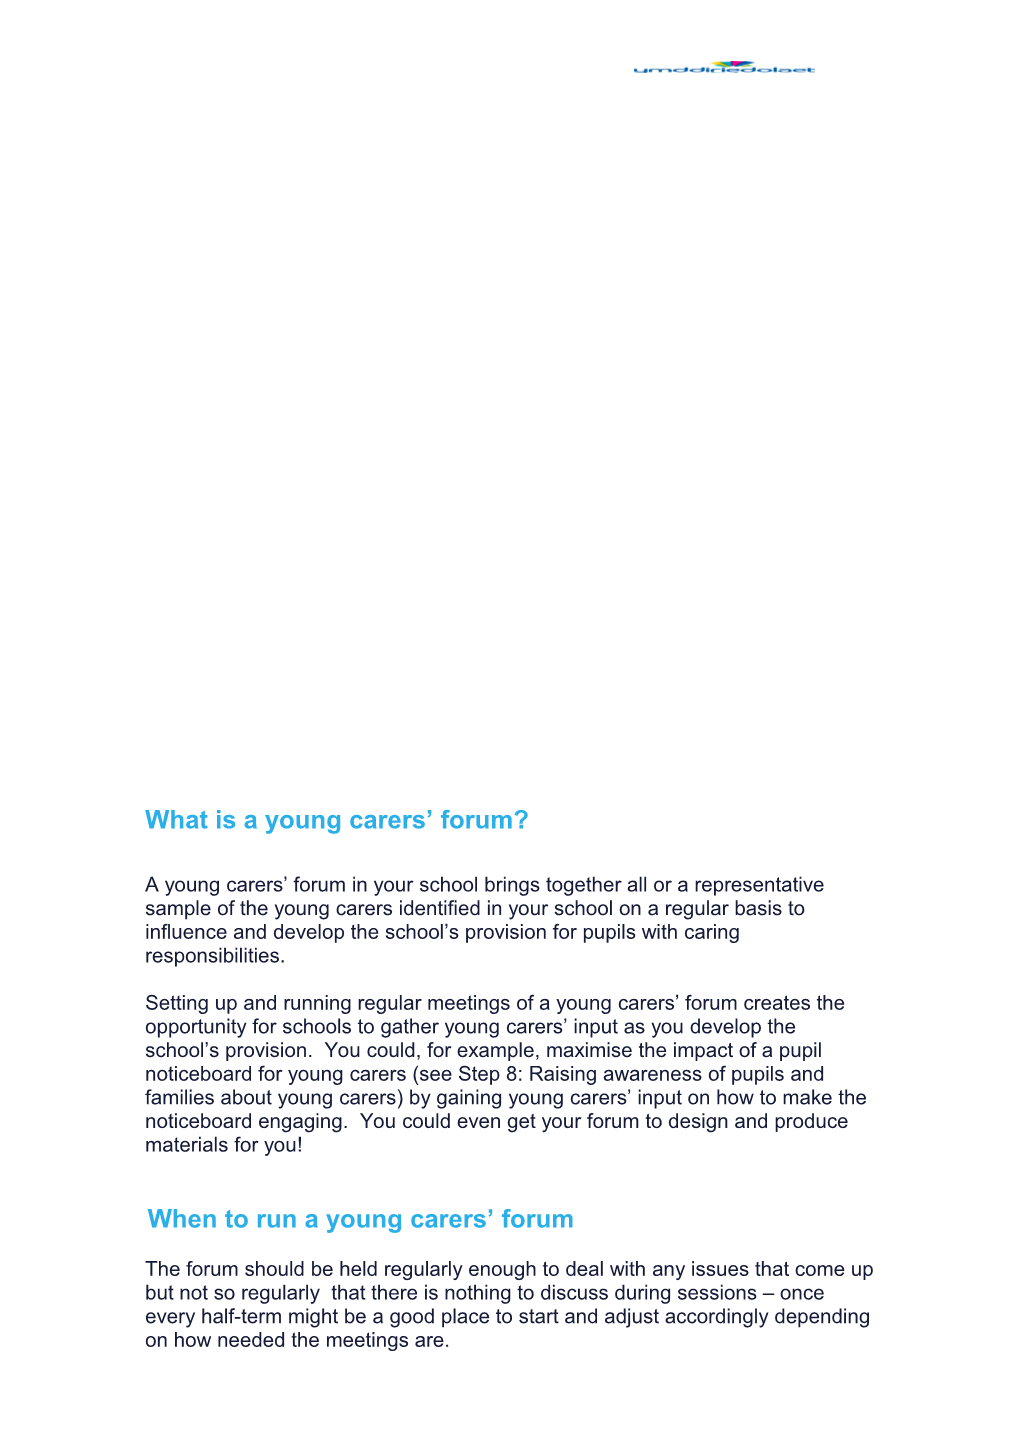 What Is a Young Carers Forum?